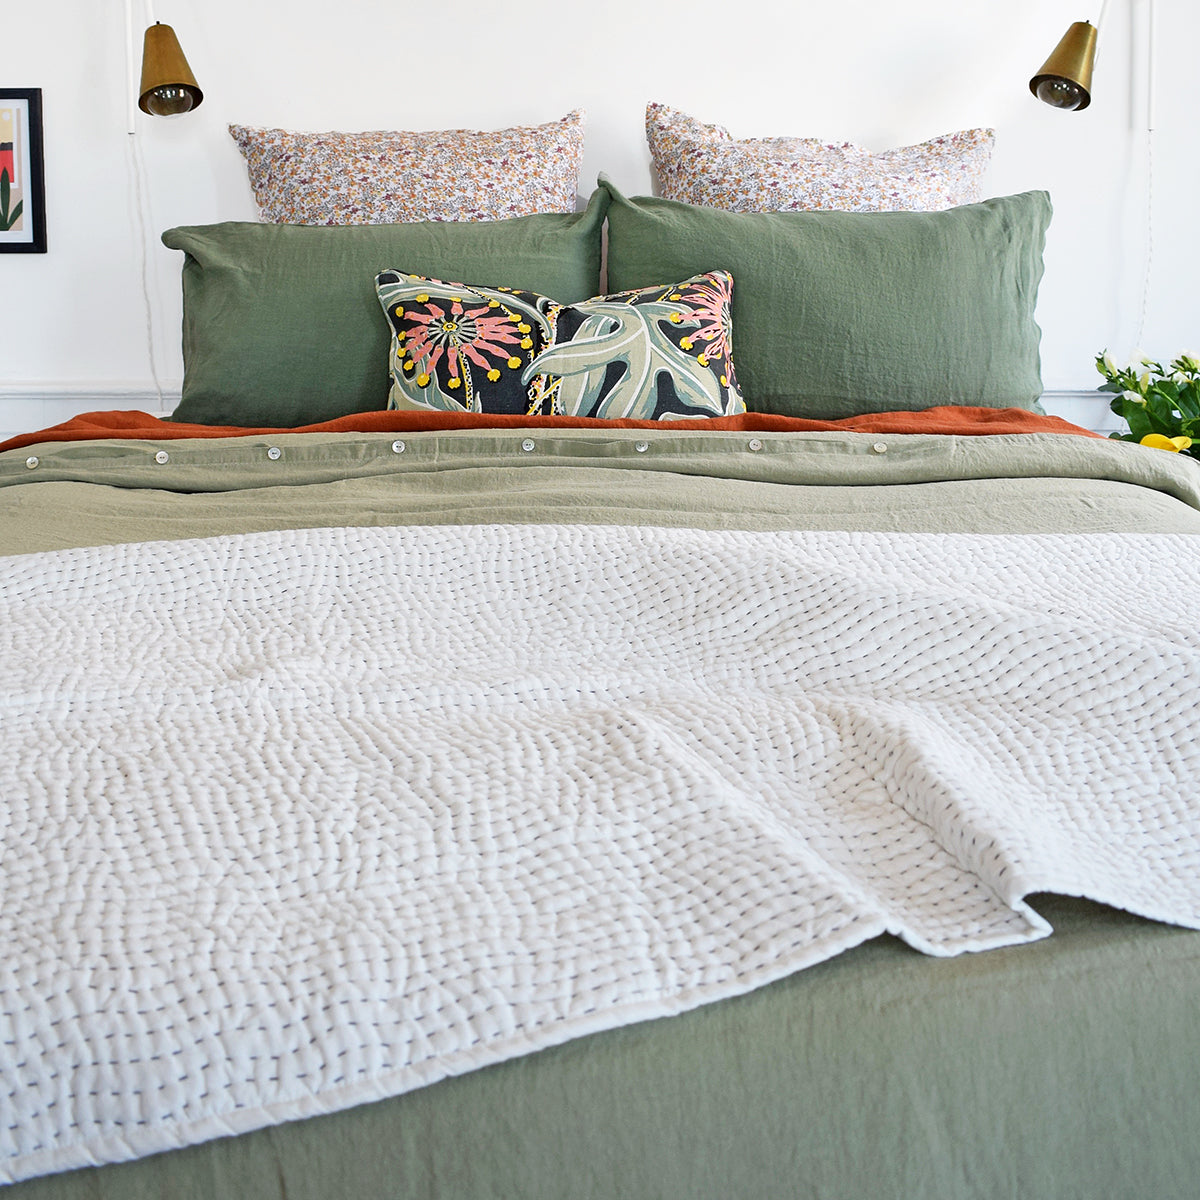 A Linge Particulier Linen Duvet in Fennel gives a olive and camo color to this duvet for a green colorful linen bedding look from Collyer&#39;s Mansion